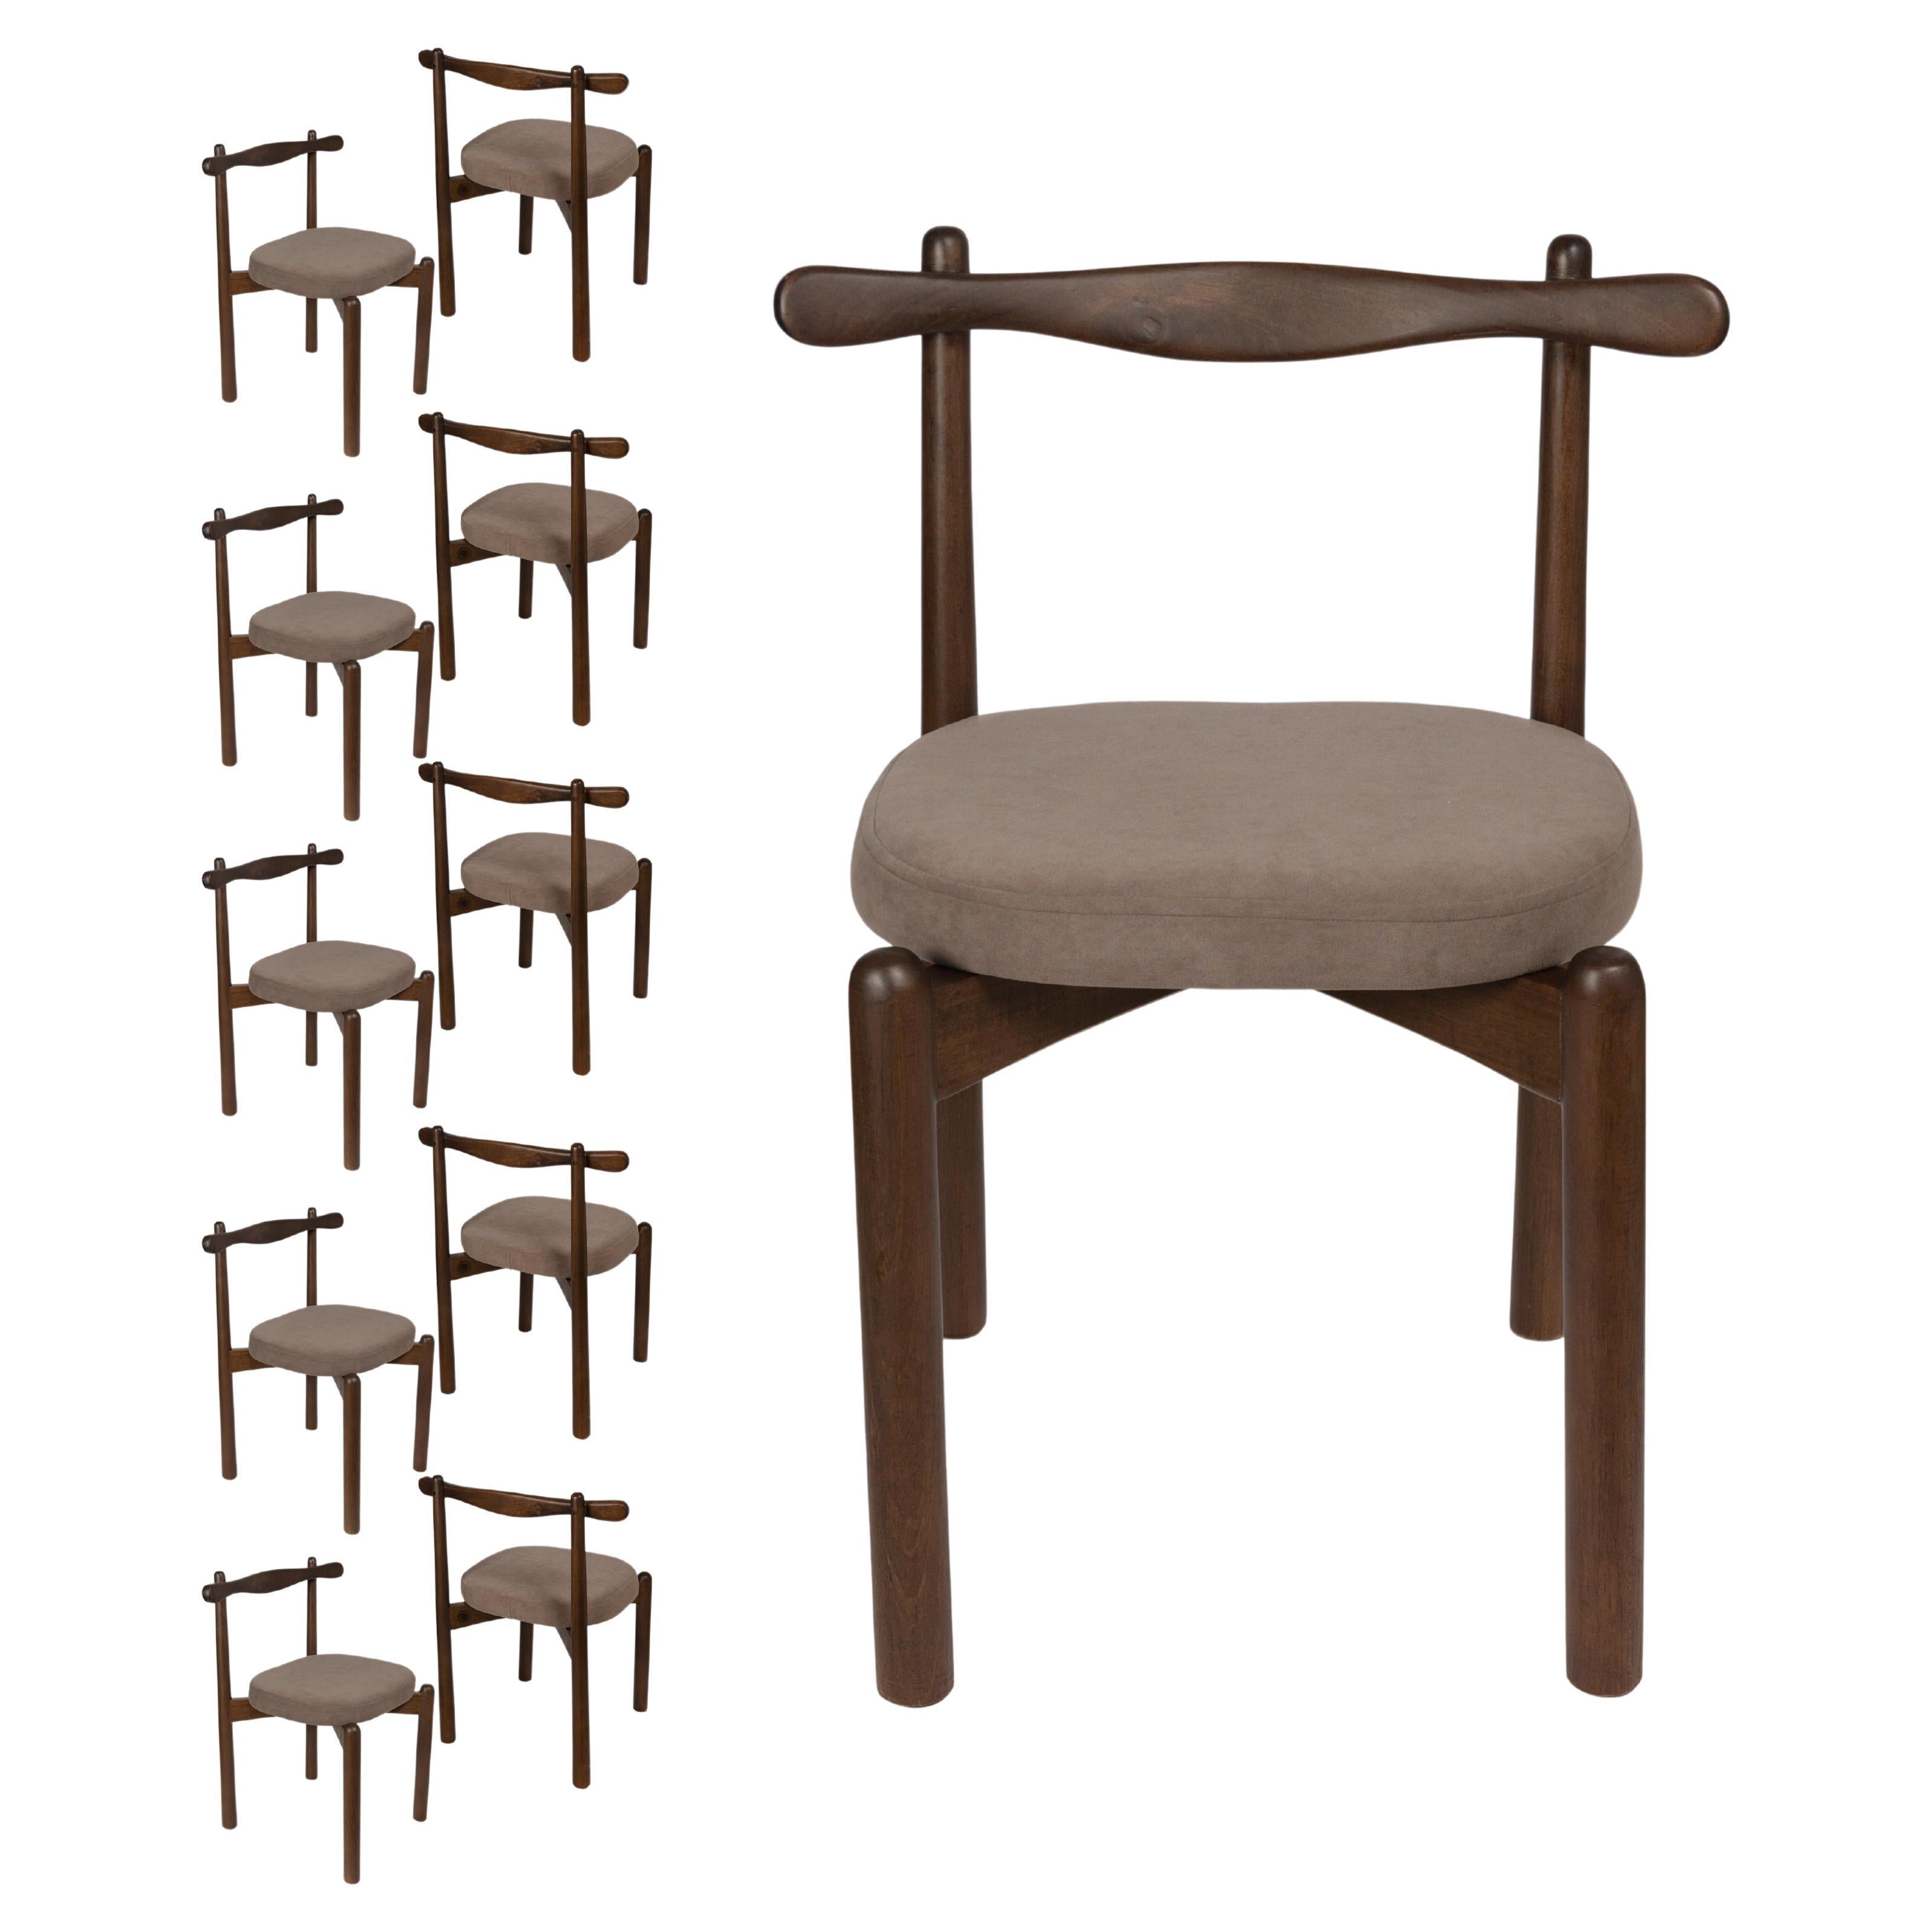 Set of 10 Dining Chairs Uçá Light Brown Wood (fabric ref : 20)